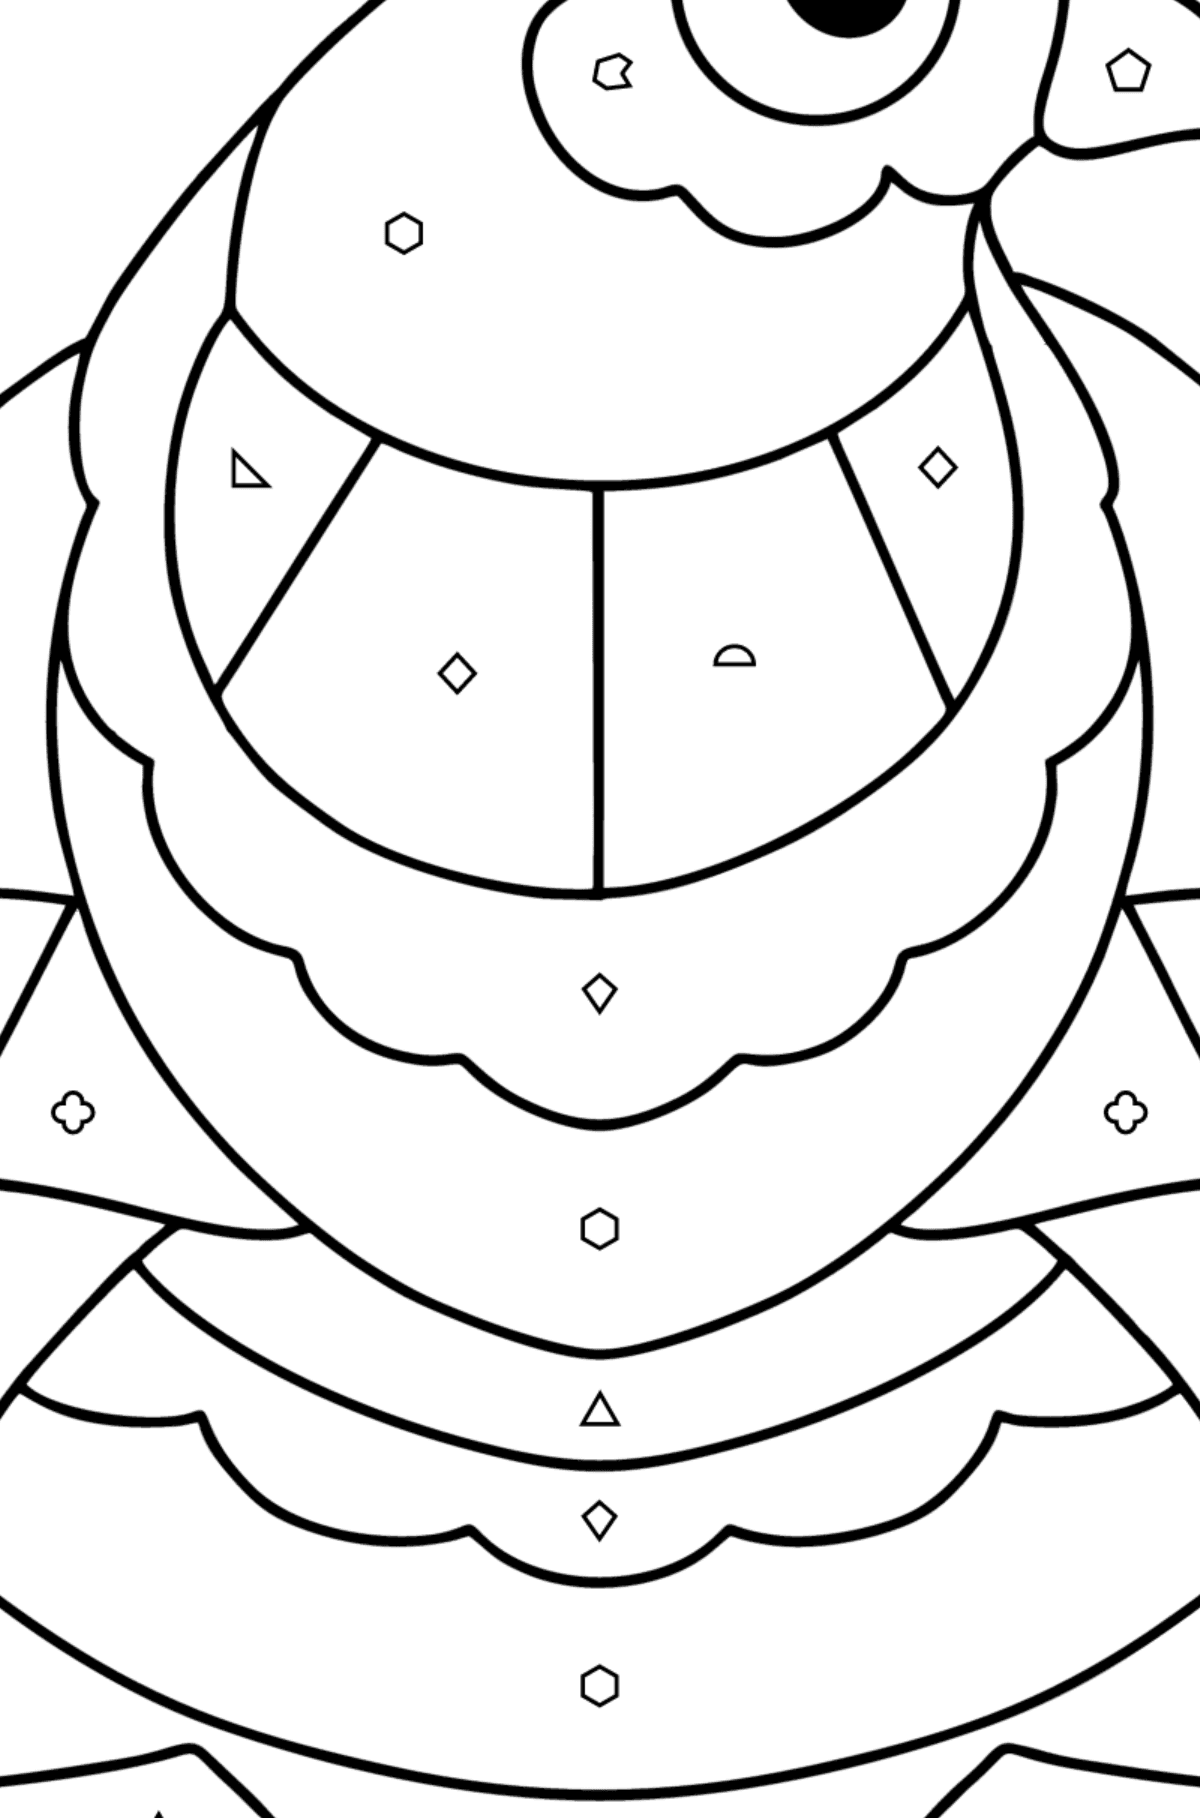 Anti stress pigeon coloring page - Coloring by Geometric Shapes for Kids